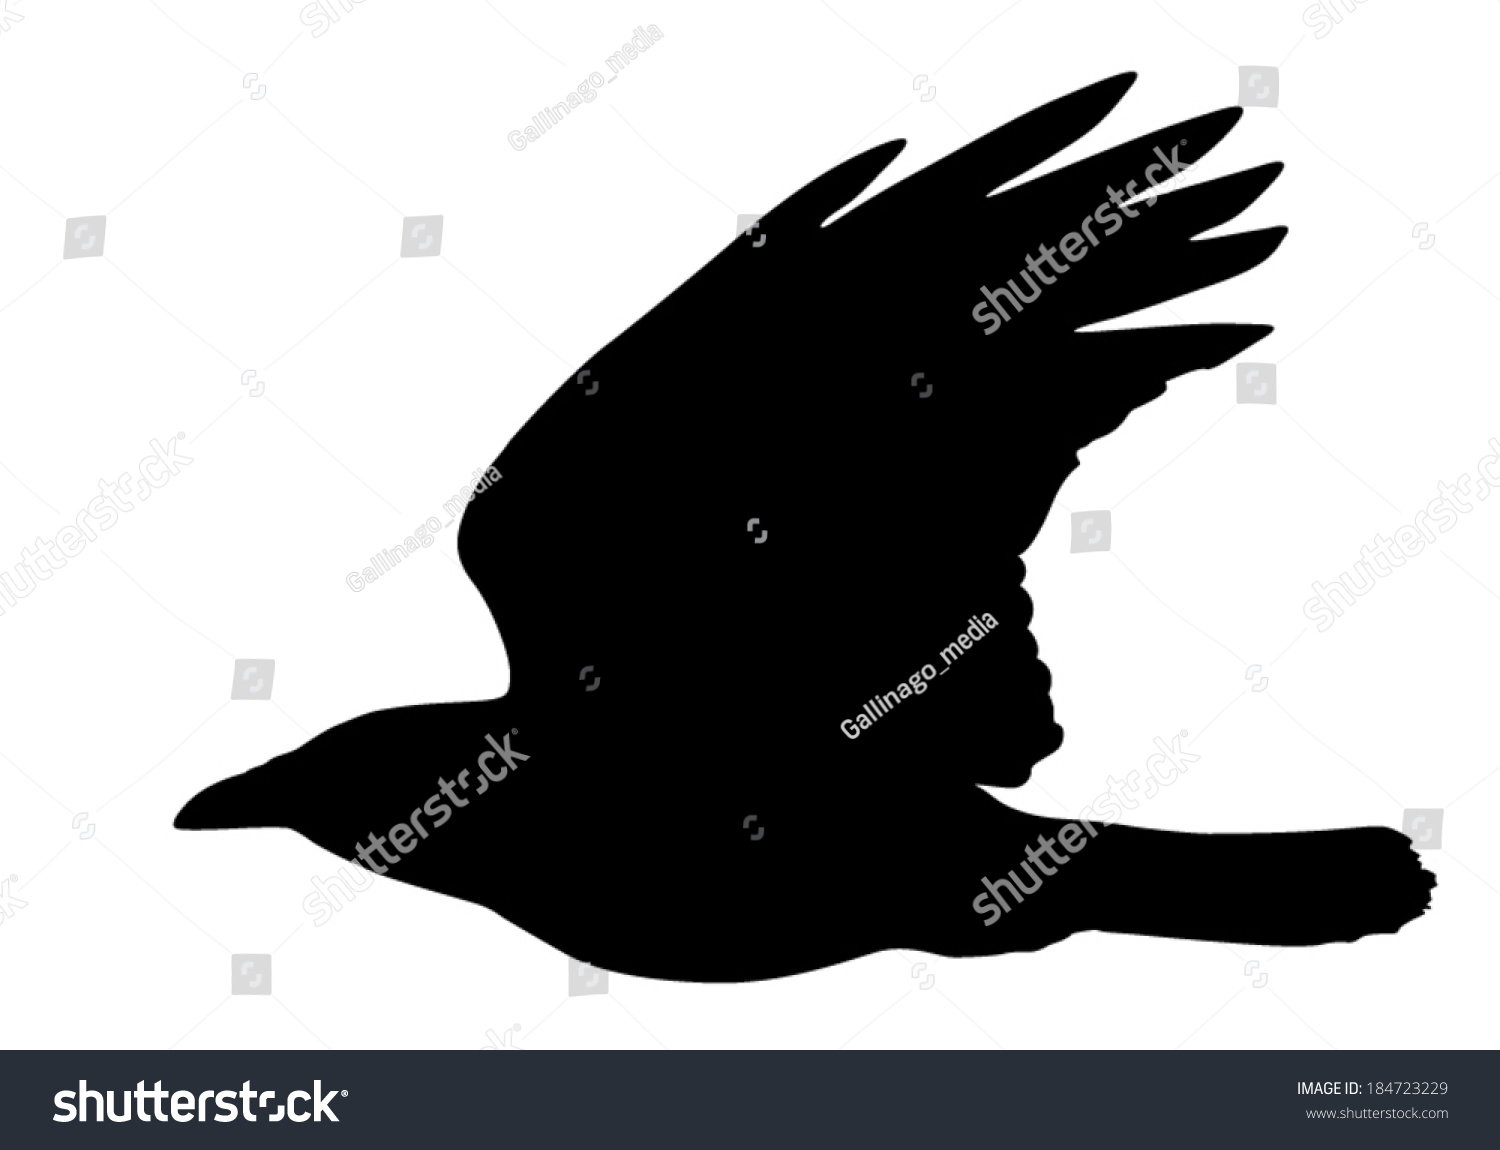 Vector Silhouette Of The Crow In Flight. - 184723229 : Shutterstock